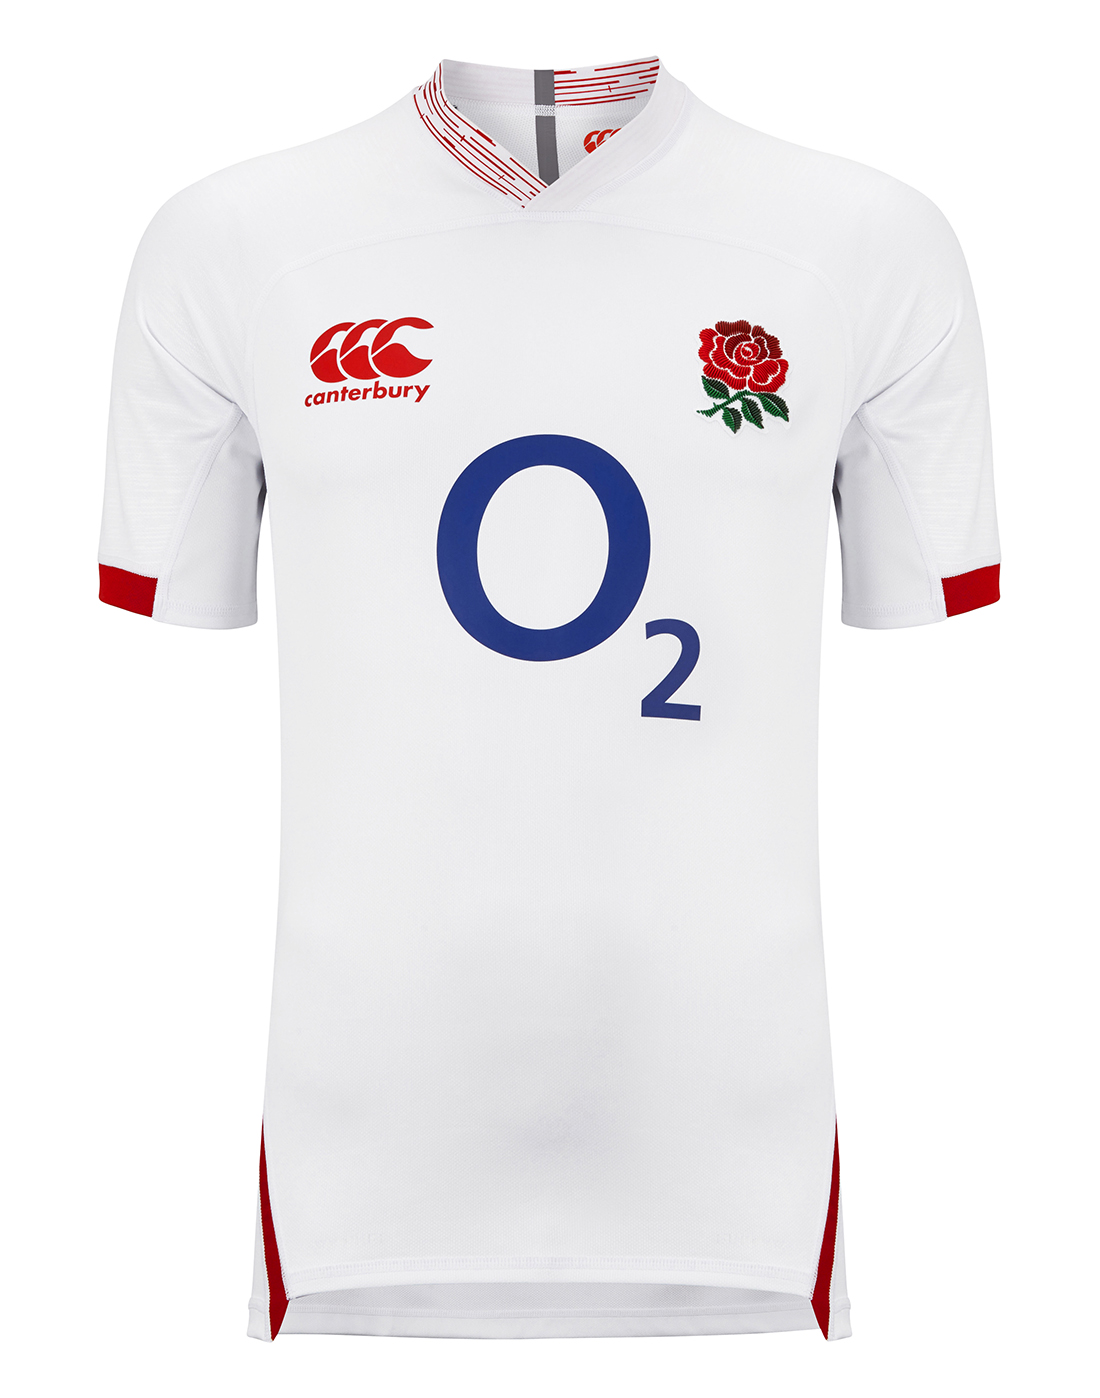 White, LANREN 2019 England Rugby World Cup T-shirt Rugby Football T-shirt England National Football Team Jersey World Cup Jersey and Camping Jersey Official Mens Training Jersey 